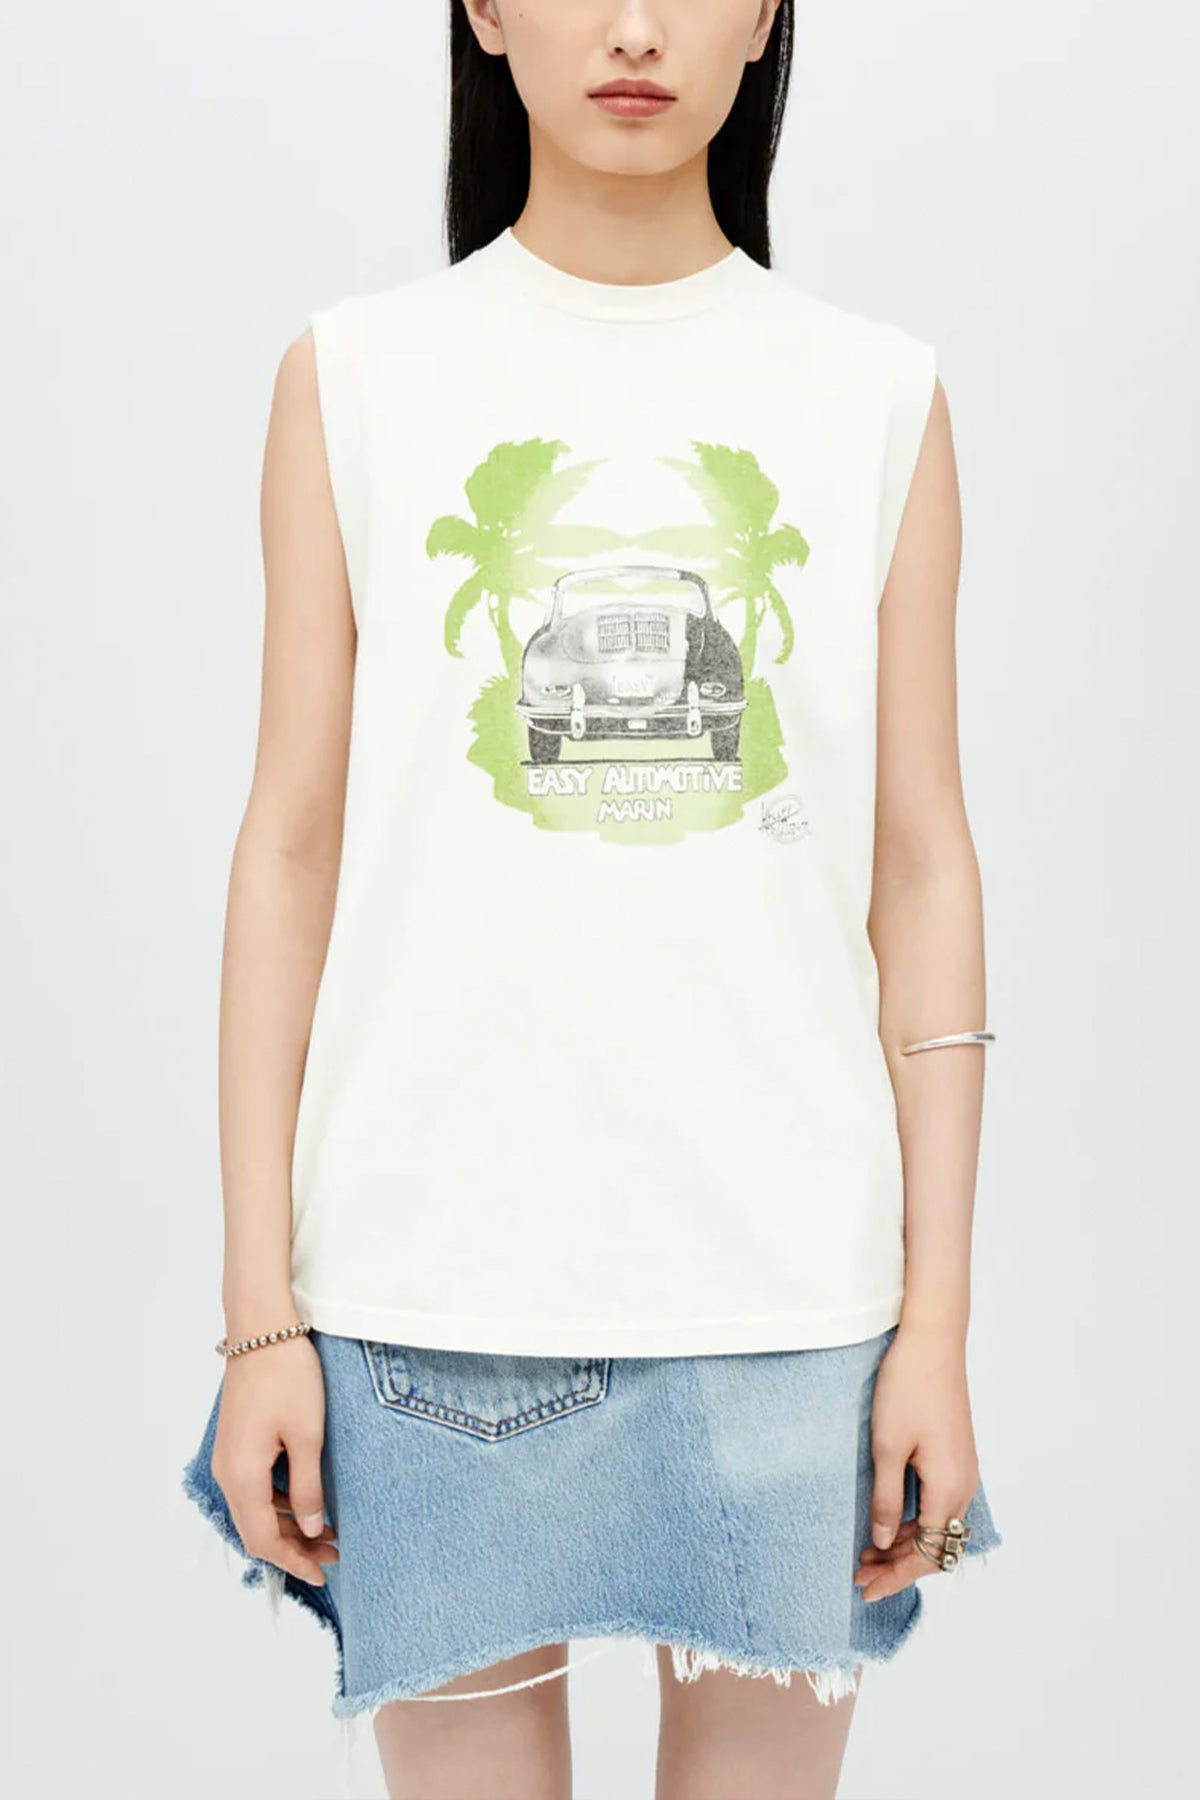 Oversized Muscle "Stanley Mouse Easy Automotive" Tank - shop-olivia.com